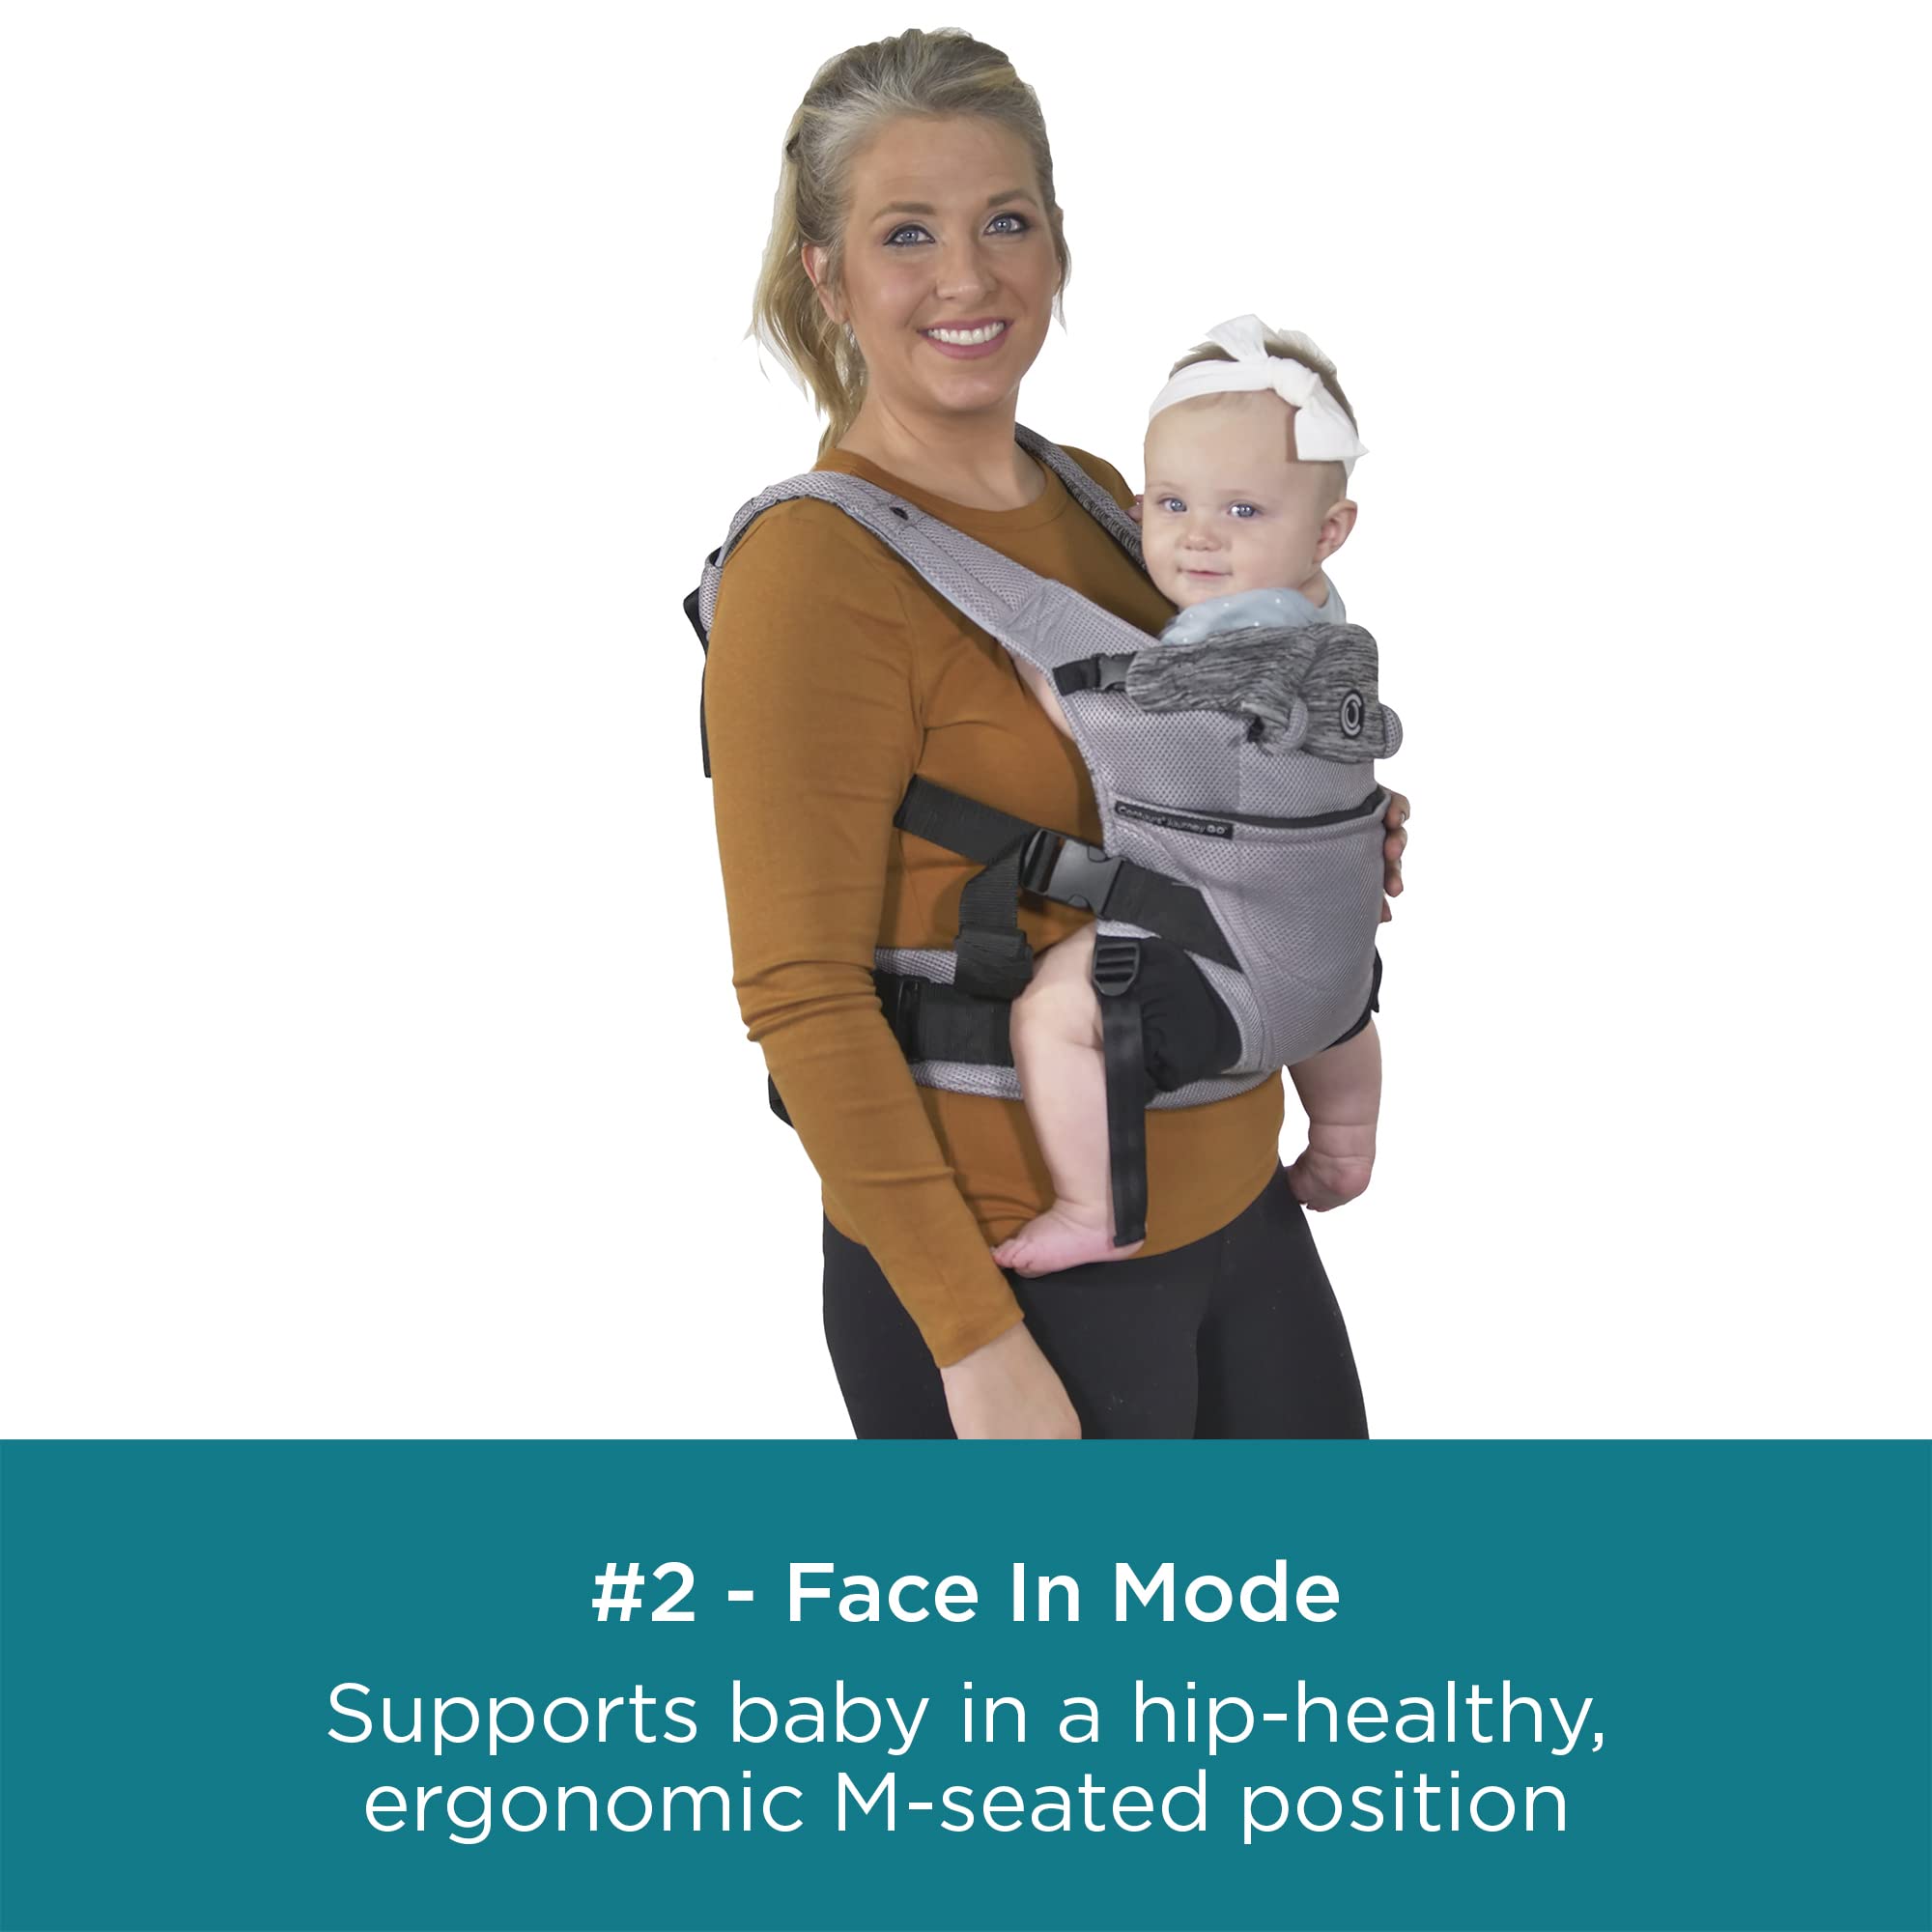 Contours Baby Carrier Newborn to Toddler |Journey GO 5 Position Convertible Easy-to-Use Baby Carrier with Pockets for Men and Women, Face in, Face Out, Front, Back & Hip (8-45 lbs) - Daydream Gray